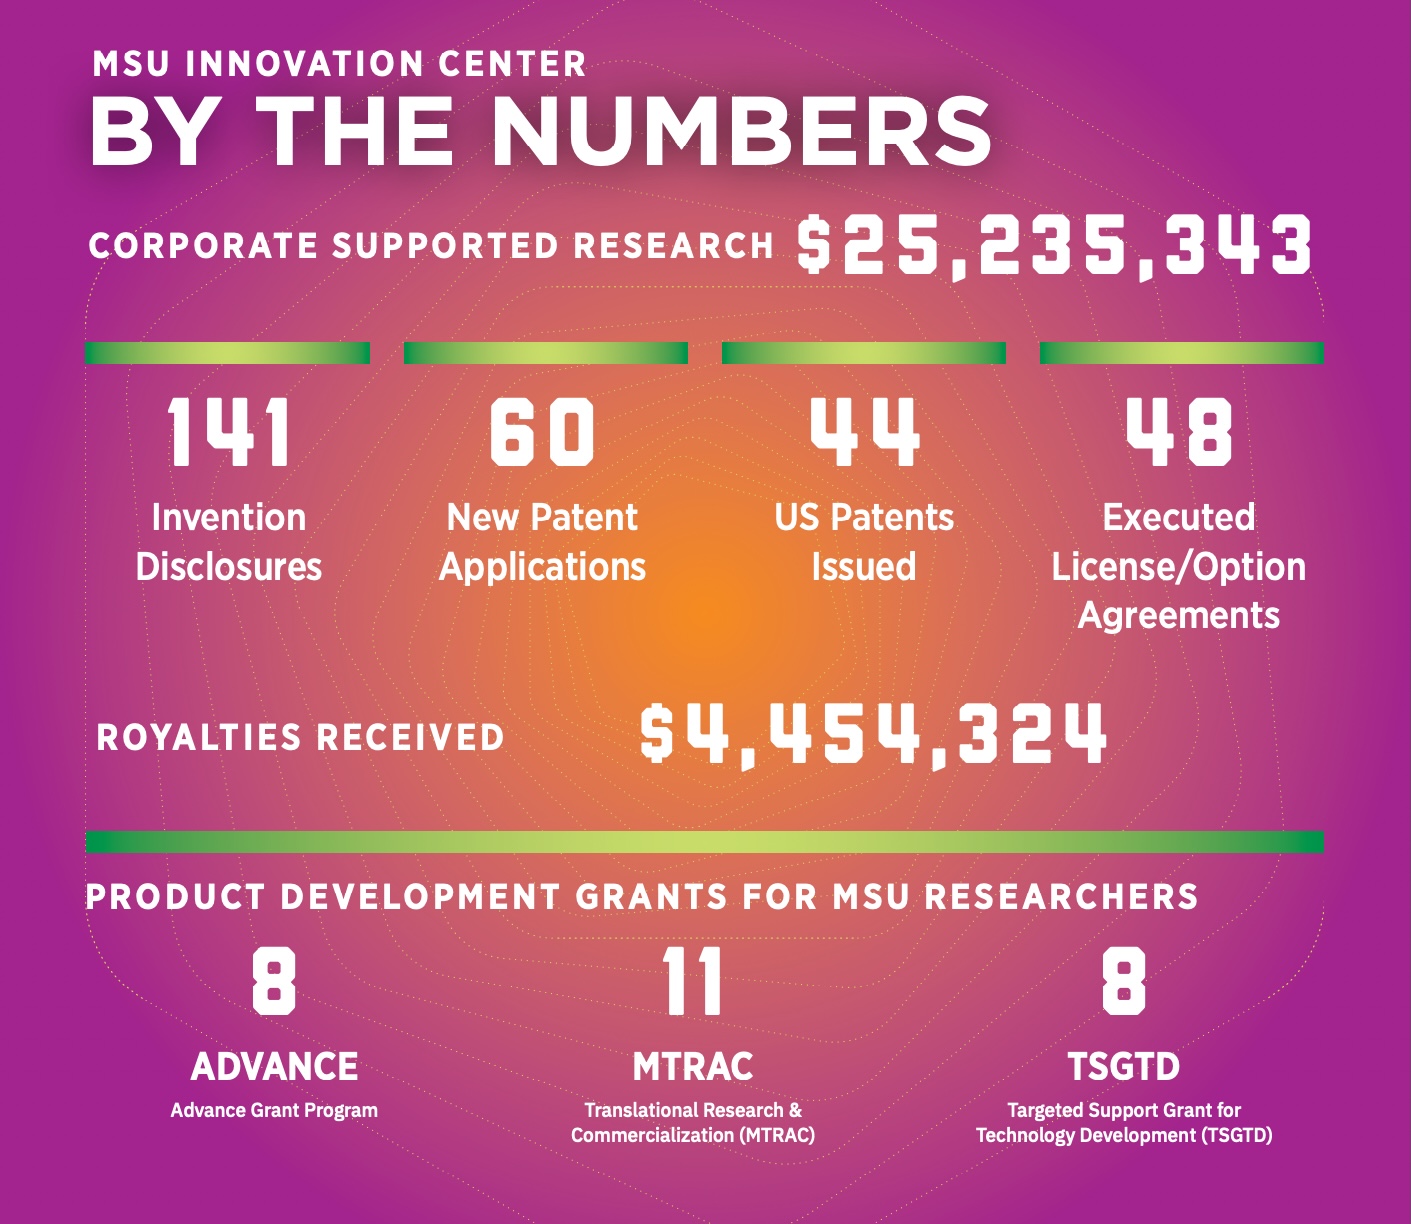 By The Numbers Corporate Supported Research $25,235,343 141 Invention Disclosures 60 New Patent Applications 44 US Patents Issued 48 Executed License/Options Agreements Royalties Received $4,454,324 Product Development Grants for MSU Researchers 8 Advance 11 MTRAC 8 TSGTD